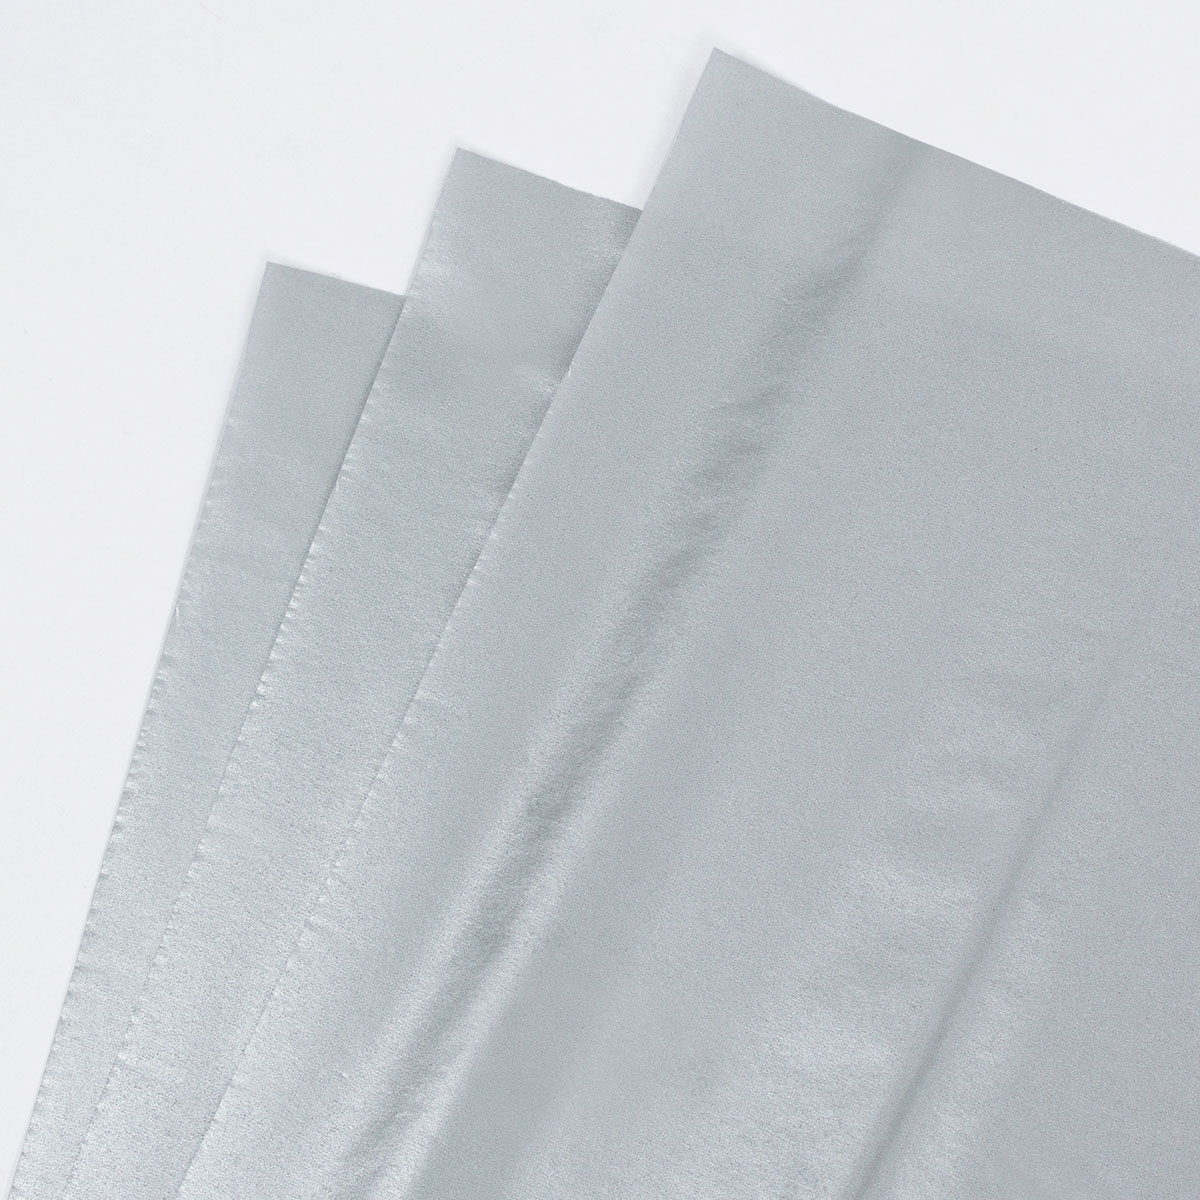 Silver Tissue Paper [7 Sheets]